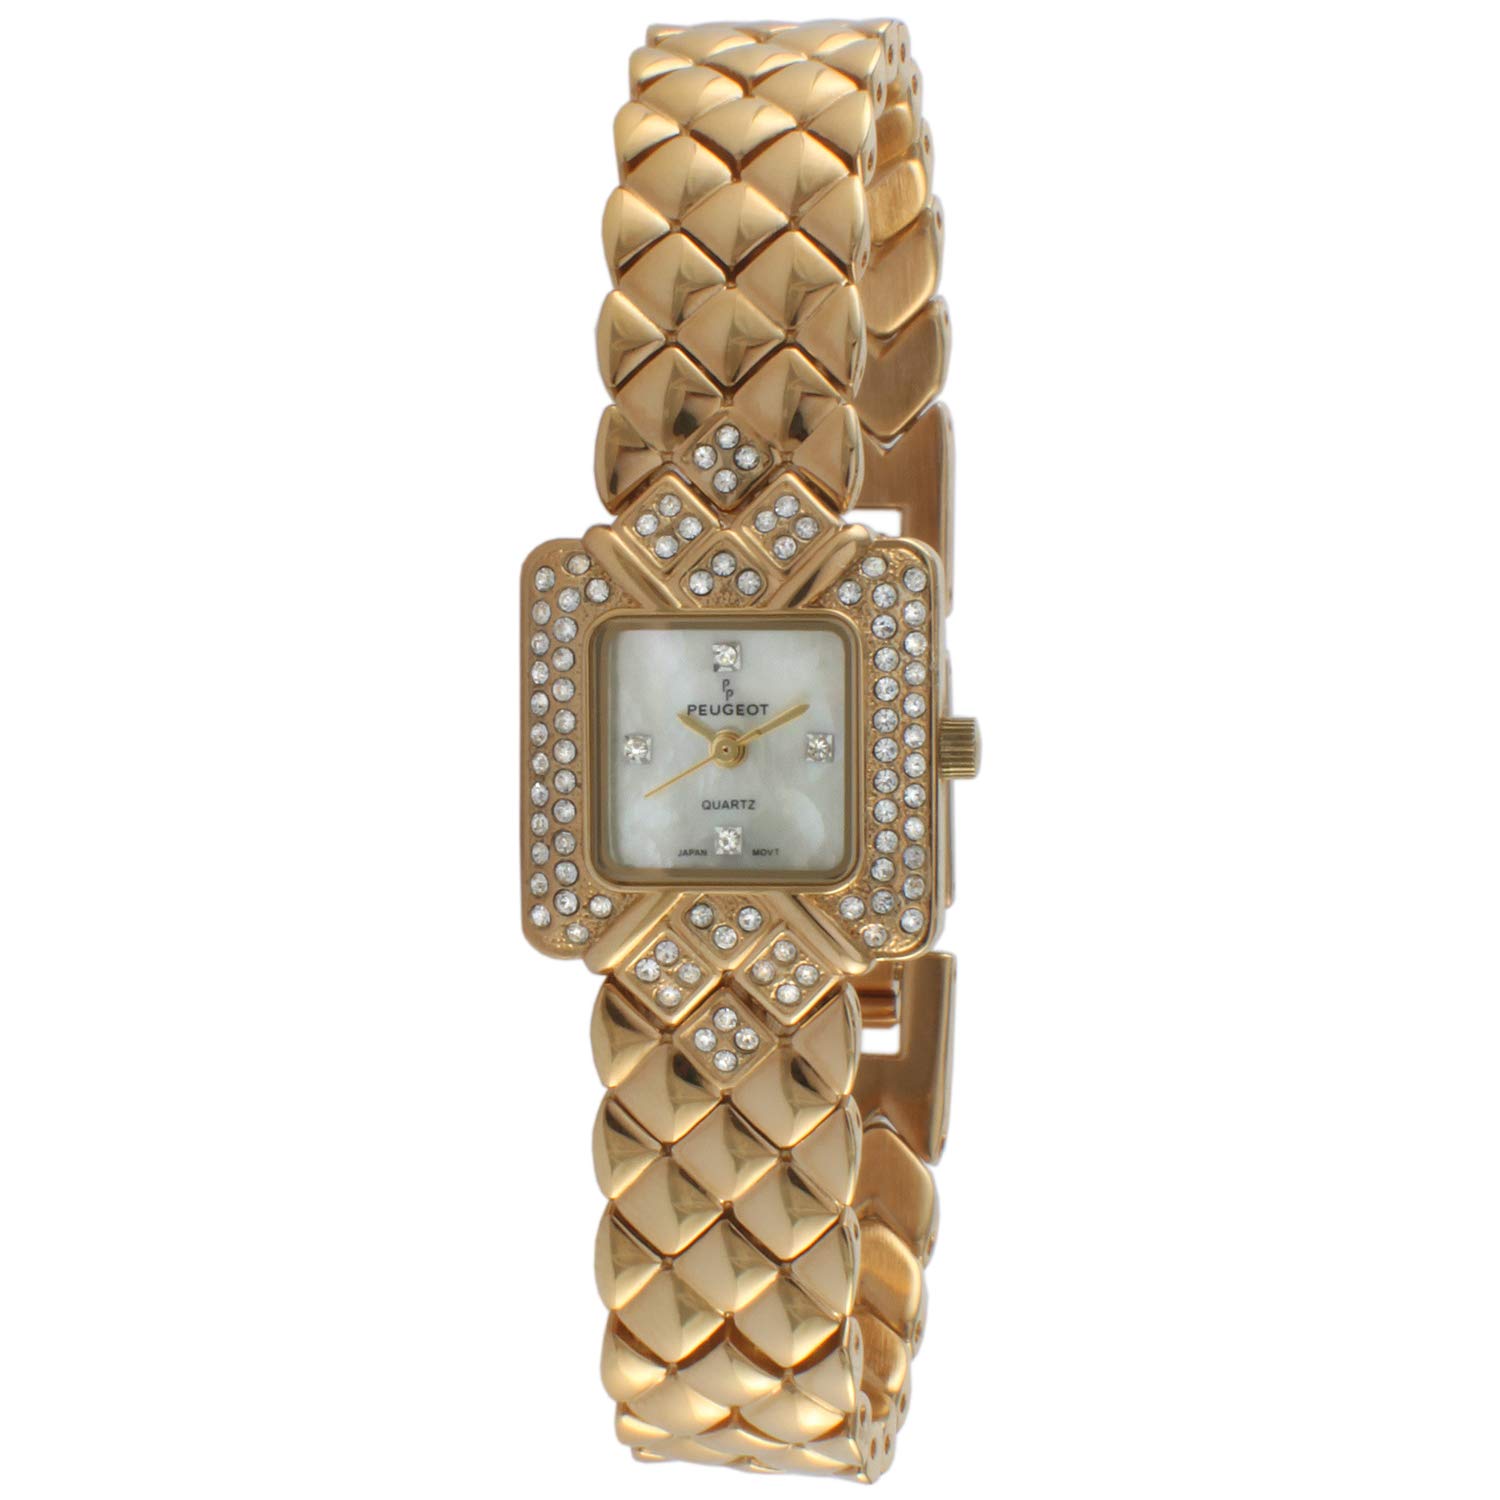 Peugeot Ladies Gold-Tone Bracelet Watch with a Swarovski Crystal Encrusted Square Bezel and a self Adjustable jewelery Style